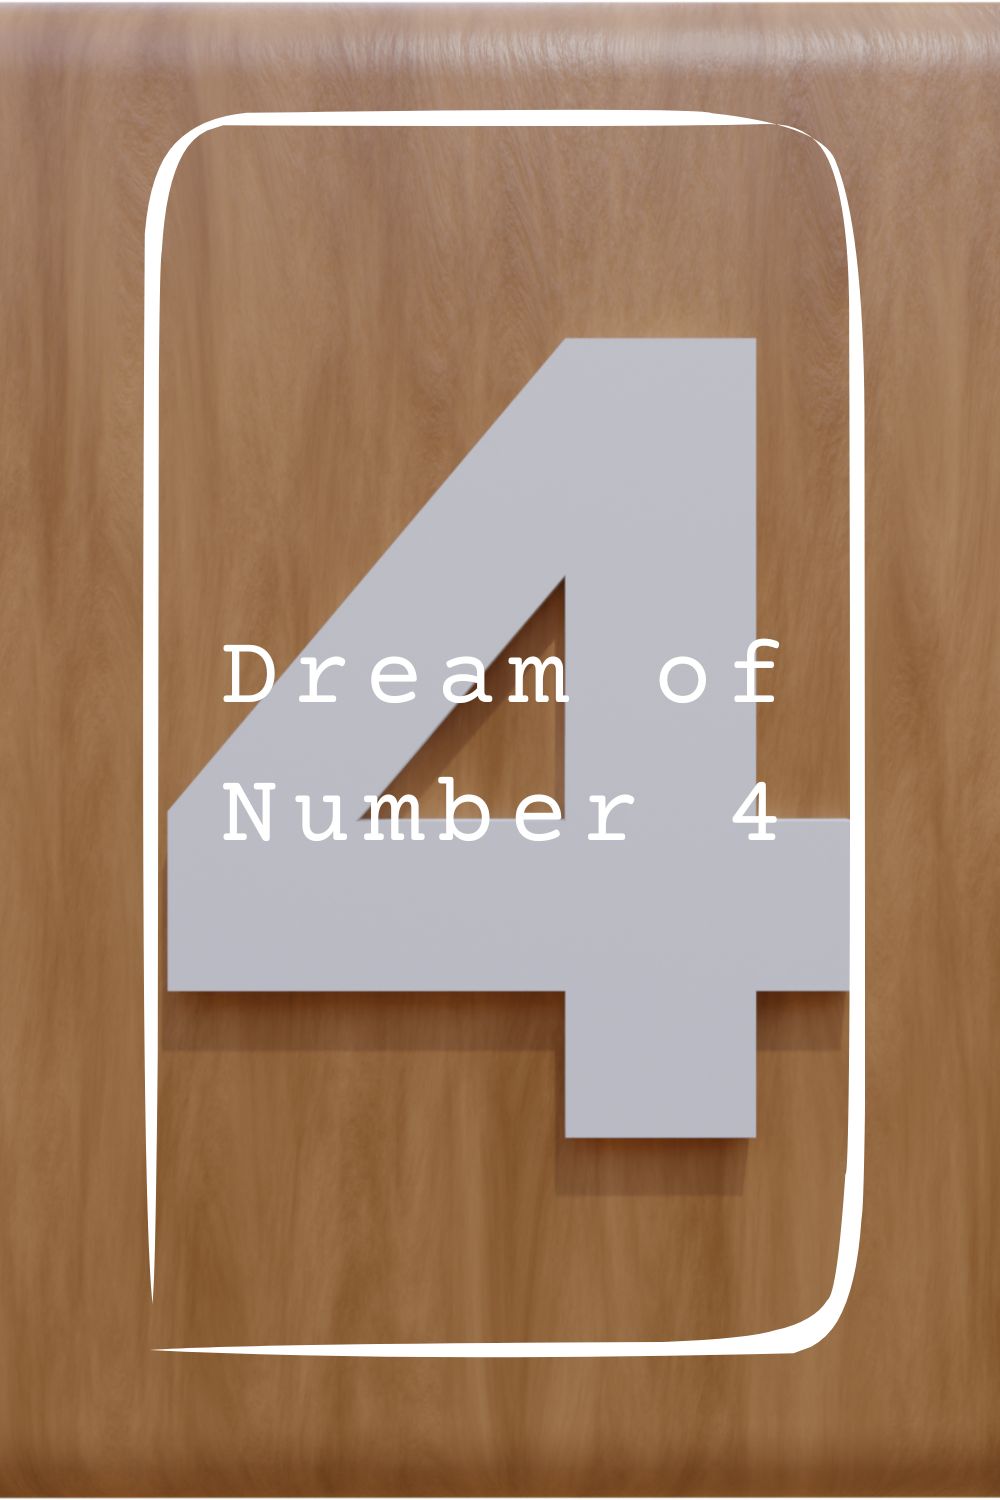 11 Dream of Number 4 Meanings4